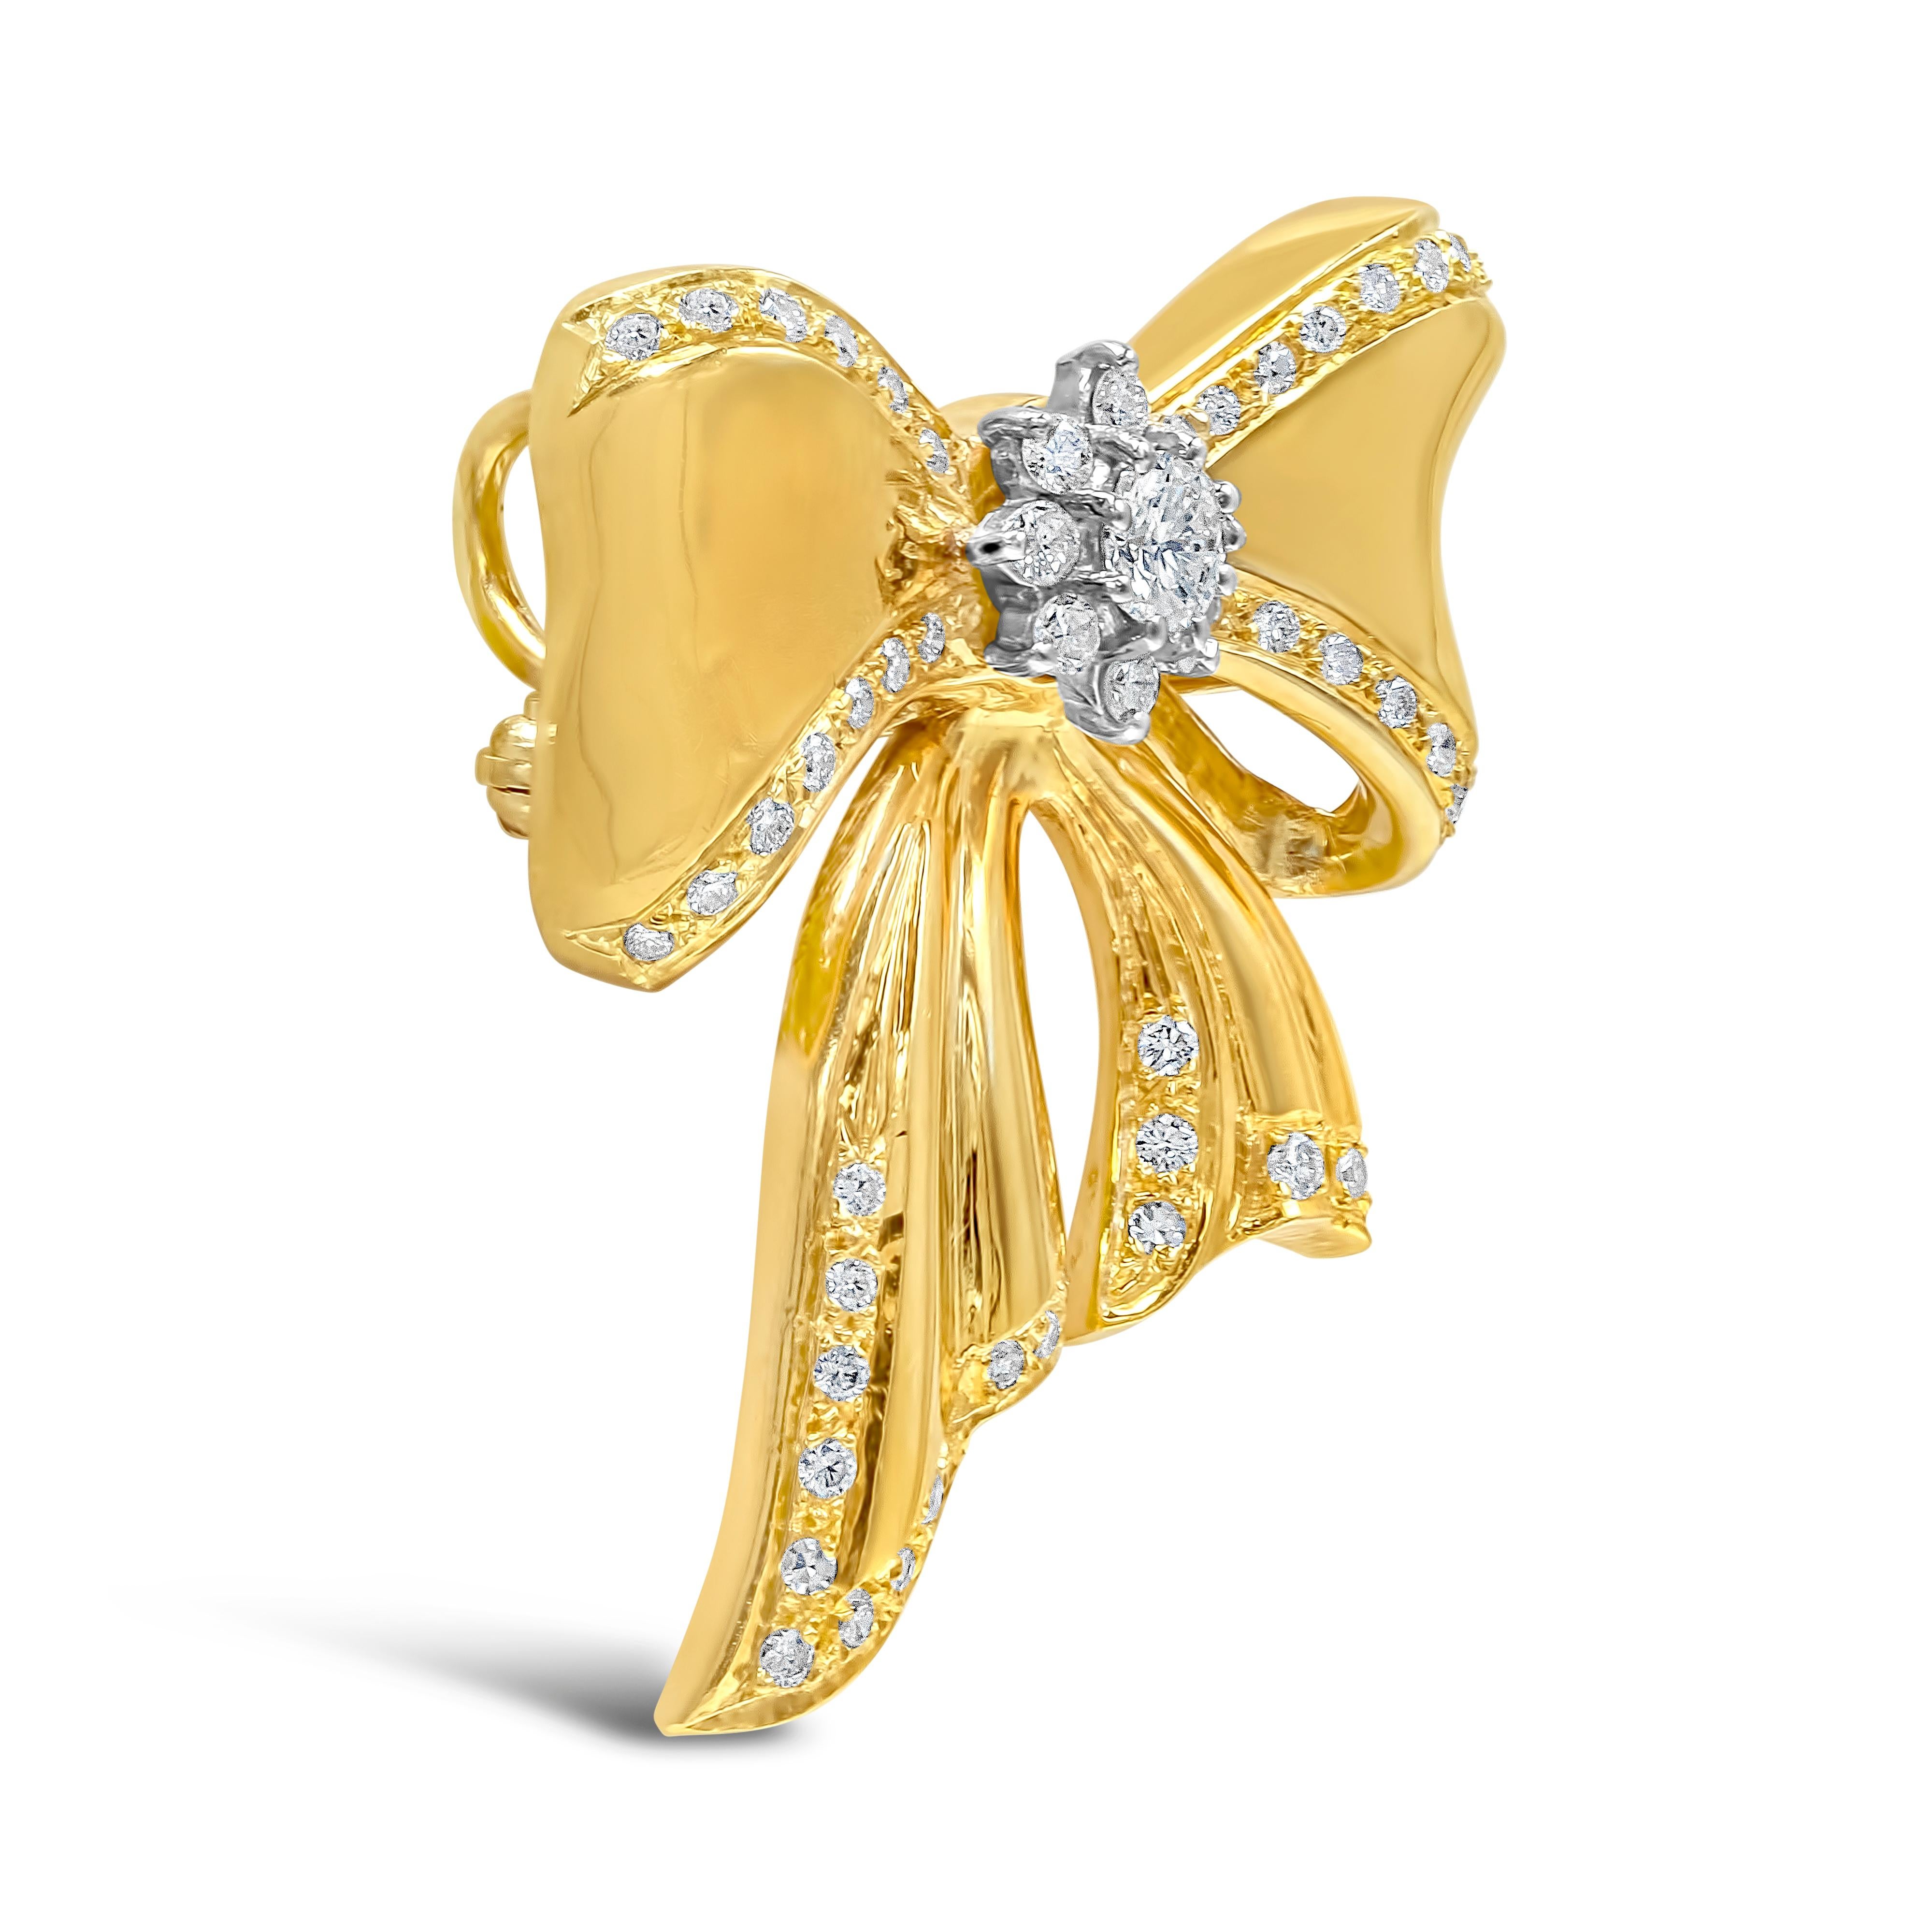 A beautiful piece of jewelry showcasing a ribbon / bow tie design made in 18k yellow gold, accented by brilliant diamonds on the center, and edges of the design. Diamonds weigh 1.01 carats total and are approximately G-H color, SI clarity.


